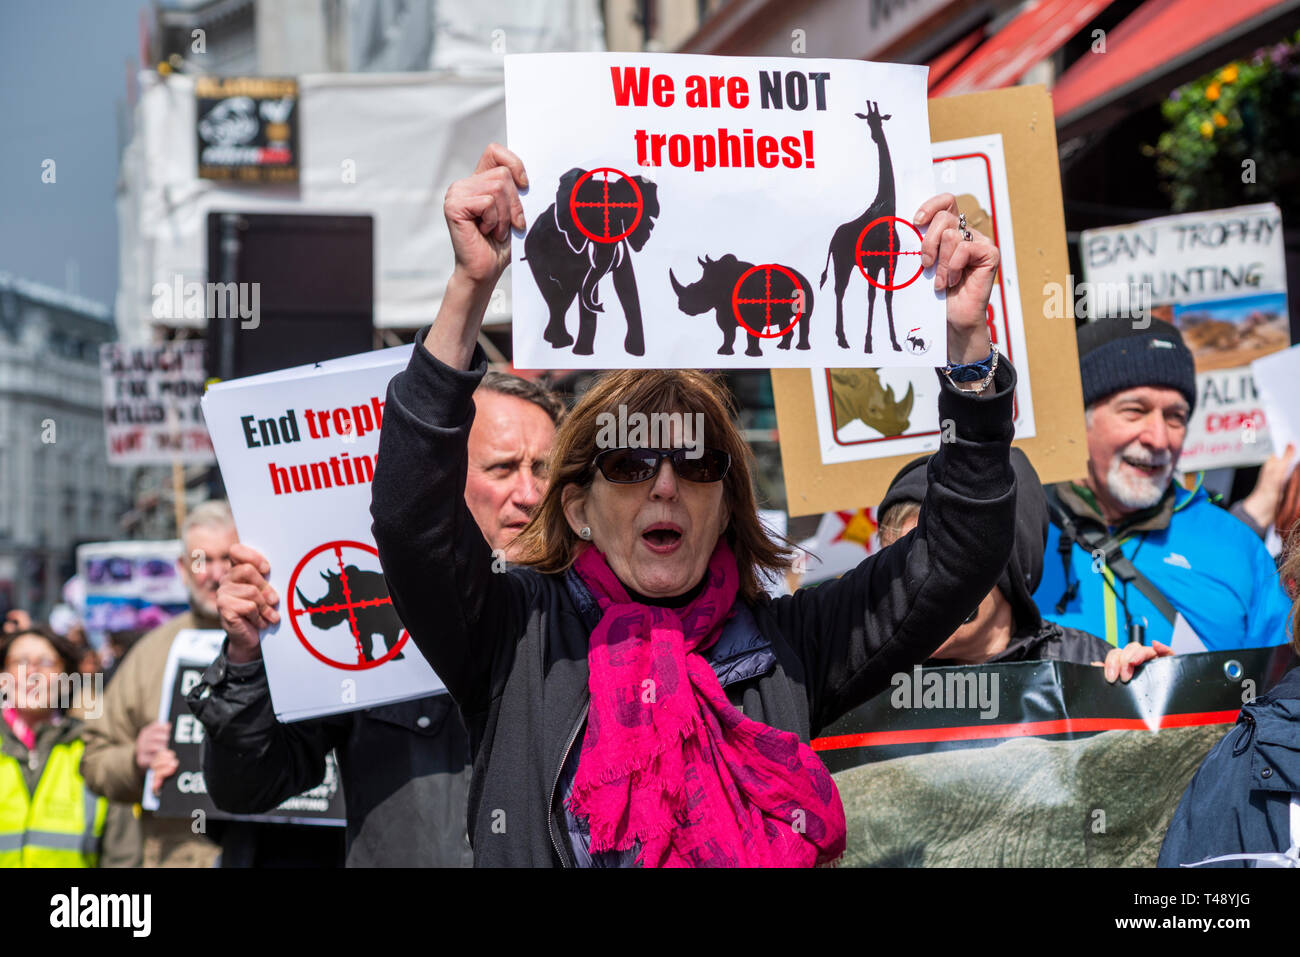 Protesters at a stop trophy hunting and ivory trade protest rally, London, UK. Female with placard Stock Photo